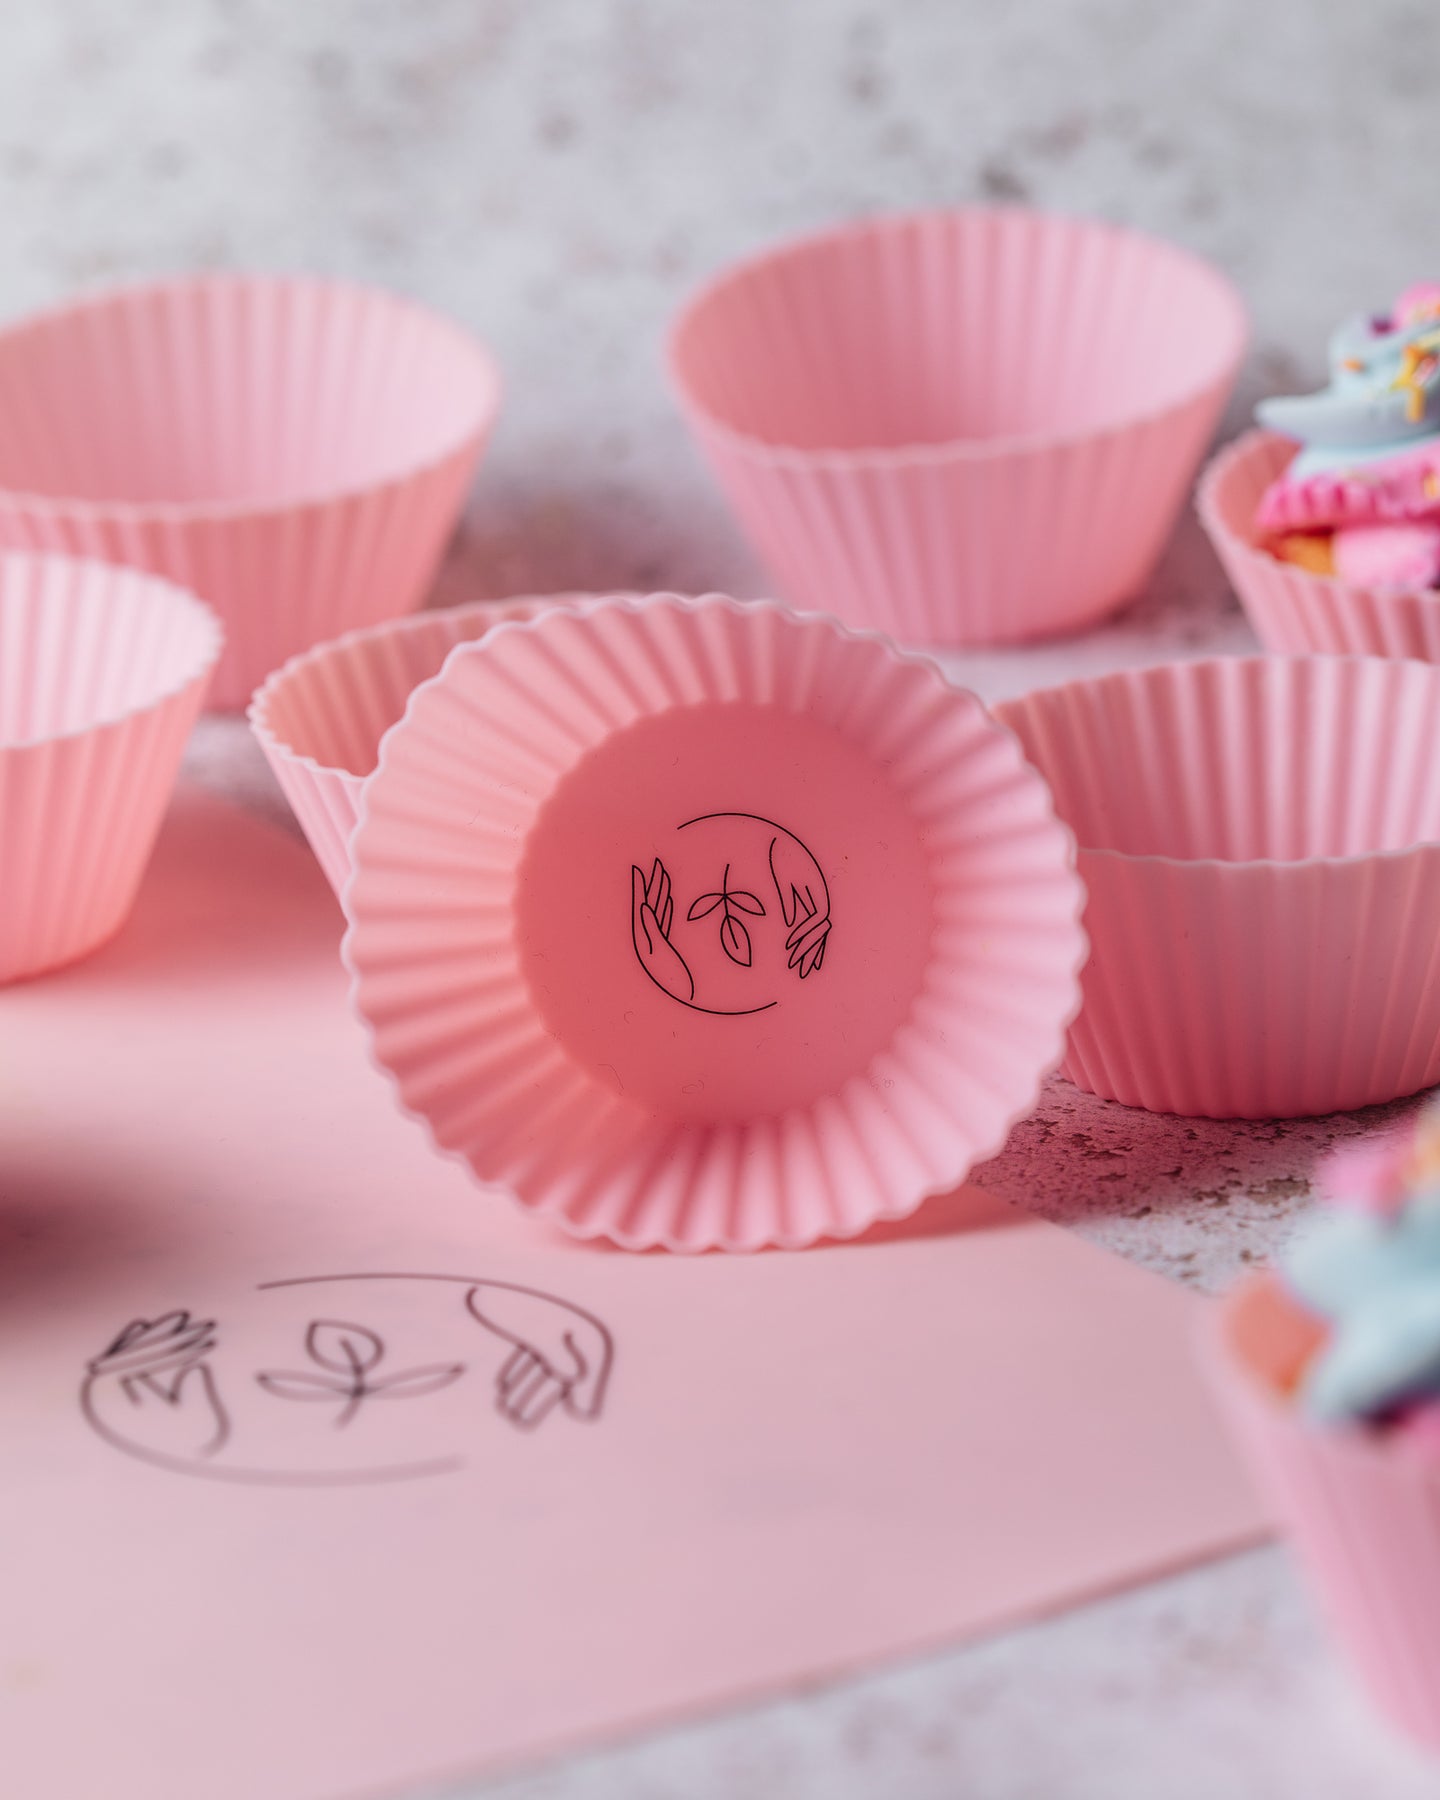 Pink silicone cupcake cases featuring a black Sasstainable logo are strewn on a surface of a silicone baking mat. There are colourful cupcakes in the background.